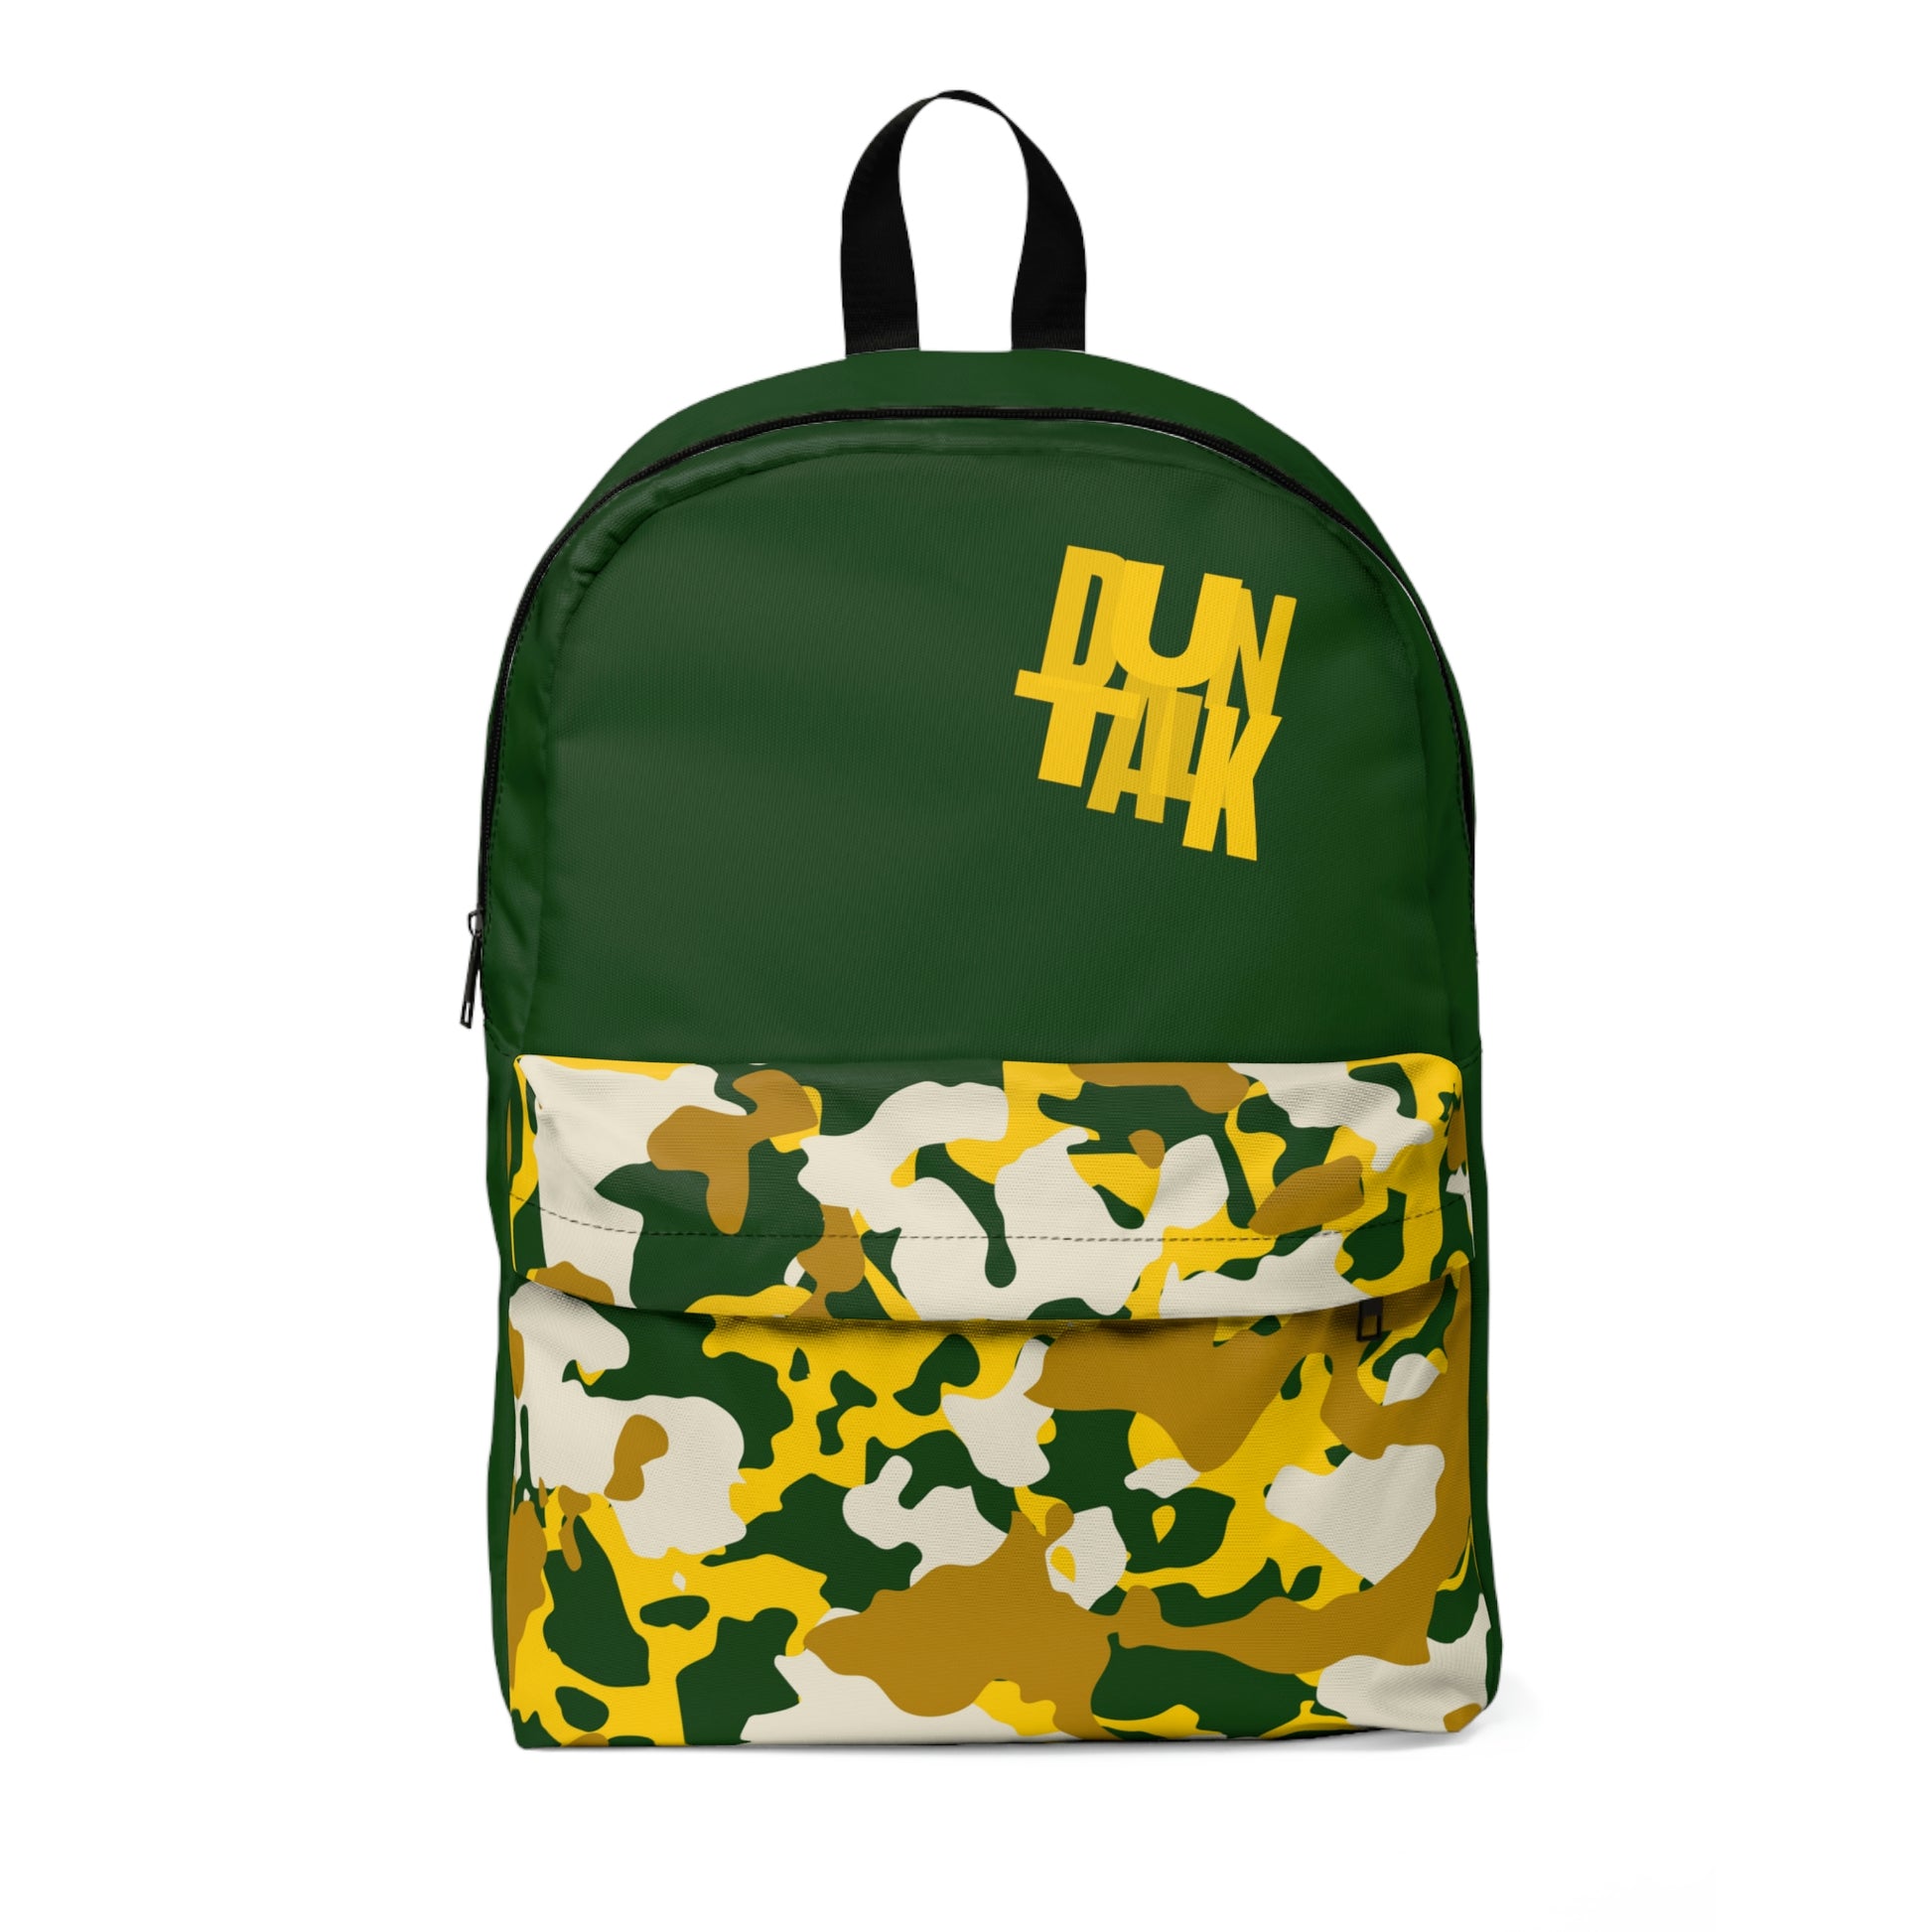 Green Backpack with yellow "Duntalk" print in the top left corner of the large pocket. Camouflage of white, yellow, green, and dark yellow on the small pocket only.